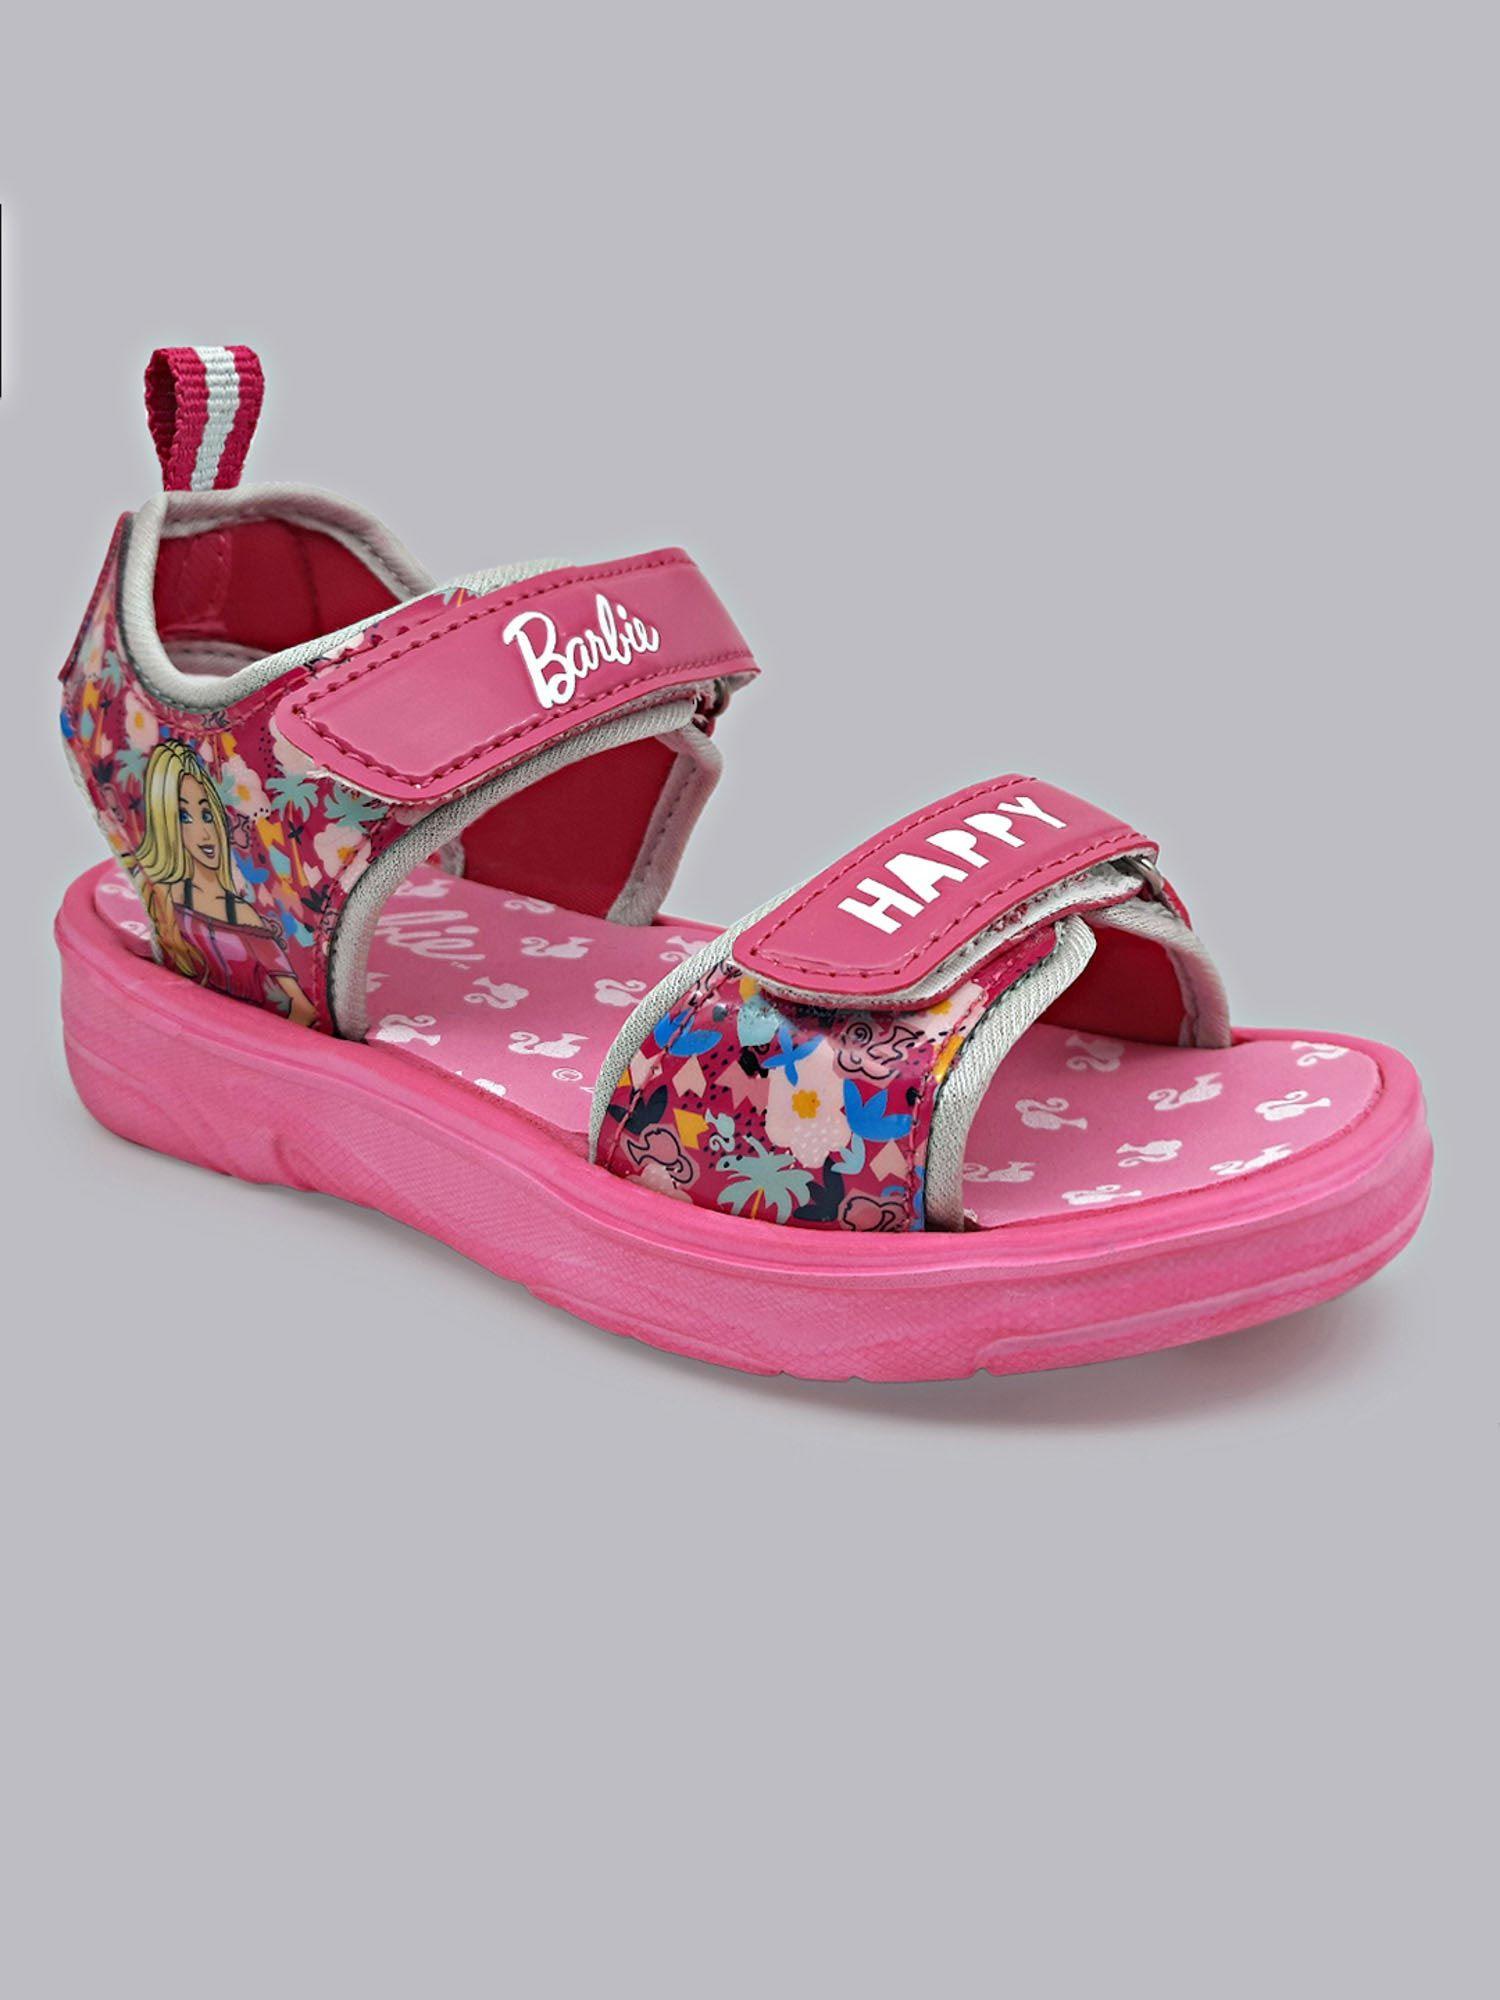 barbie printed sandals for girls - pink